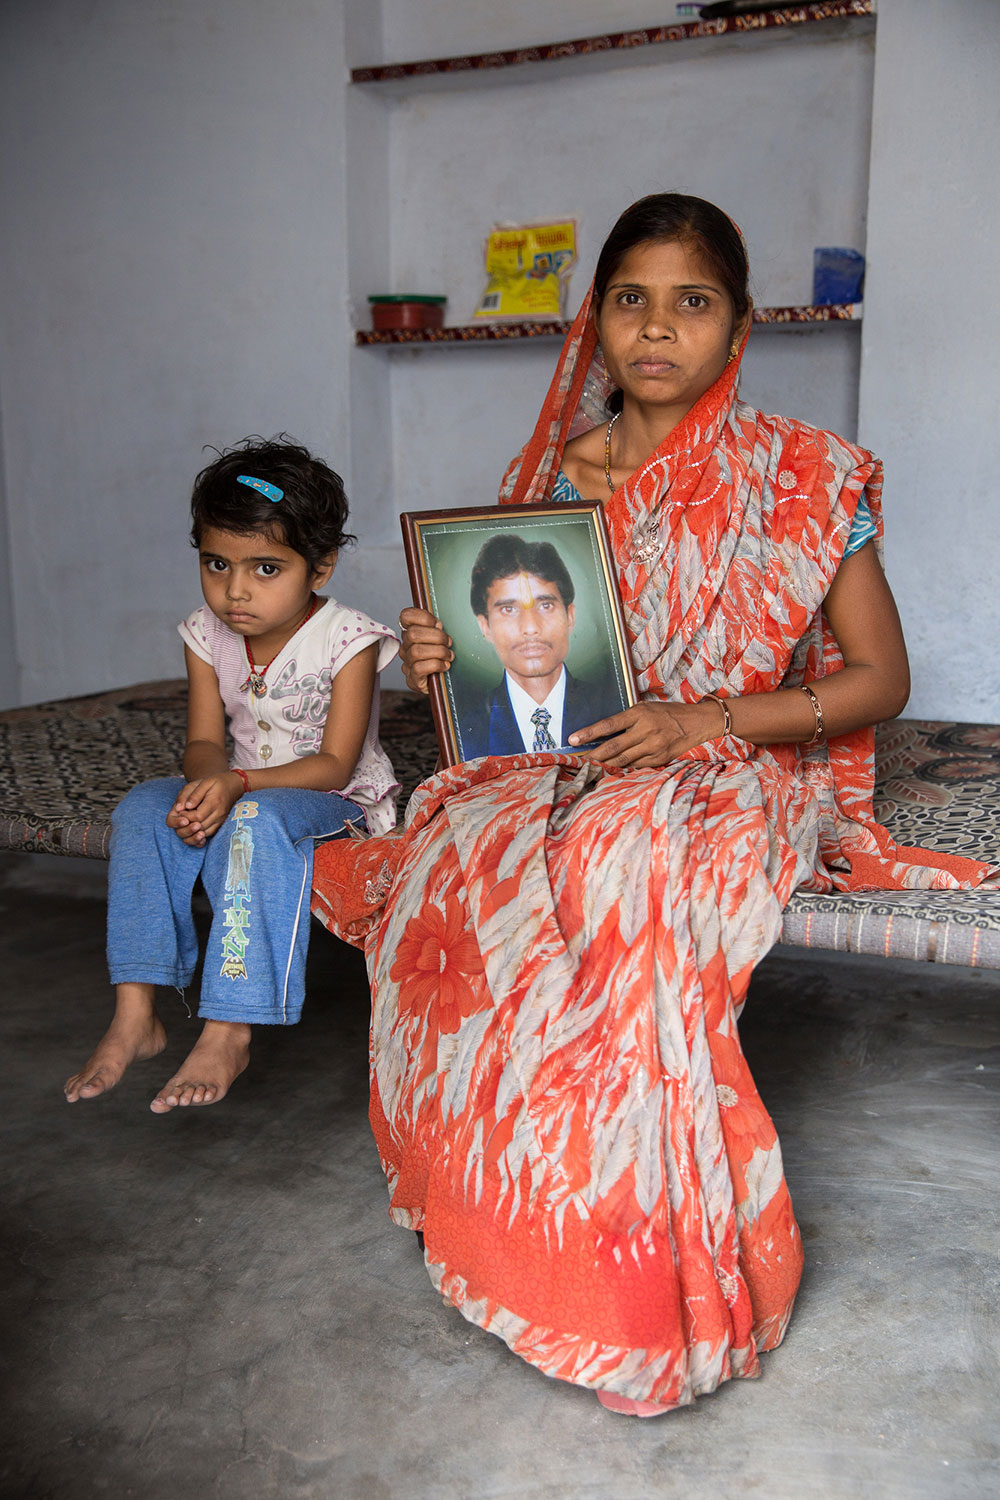  Sunita Devi Gupta, 30, with Saniya, one of her three children. She lost her husband to alcoholism in 2012. She works in the Opus III women's project. 